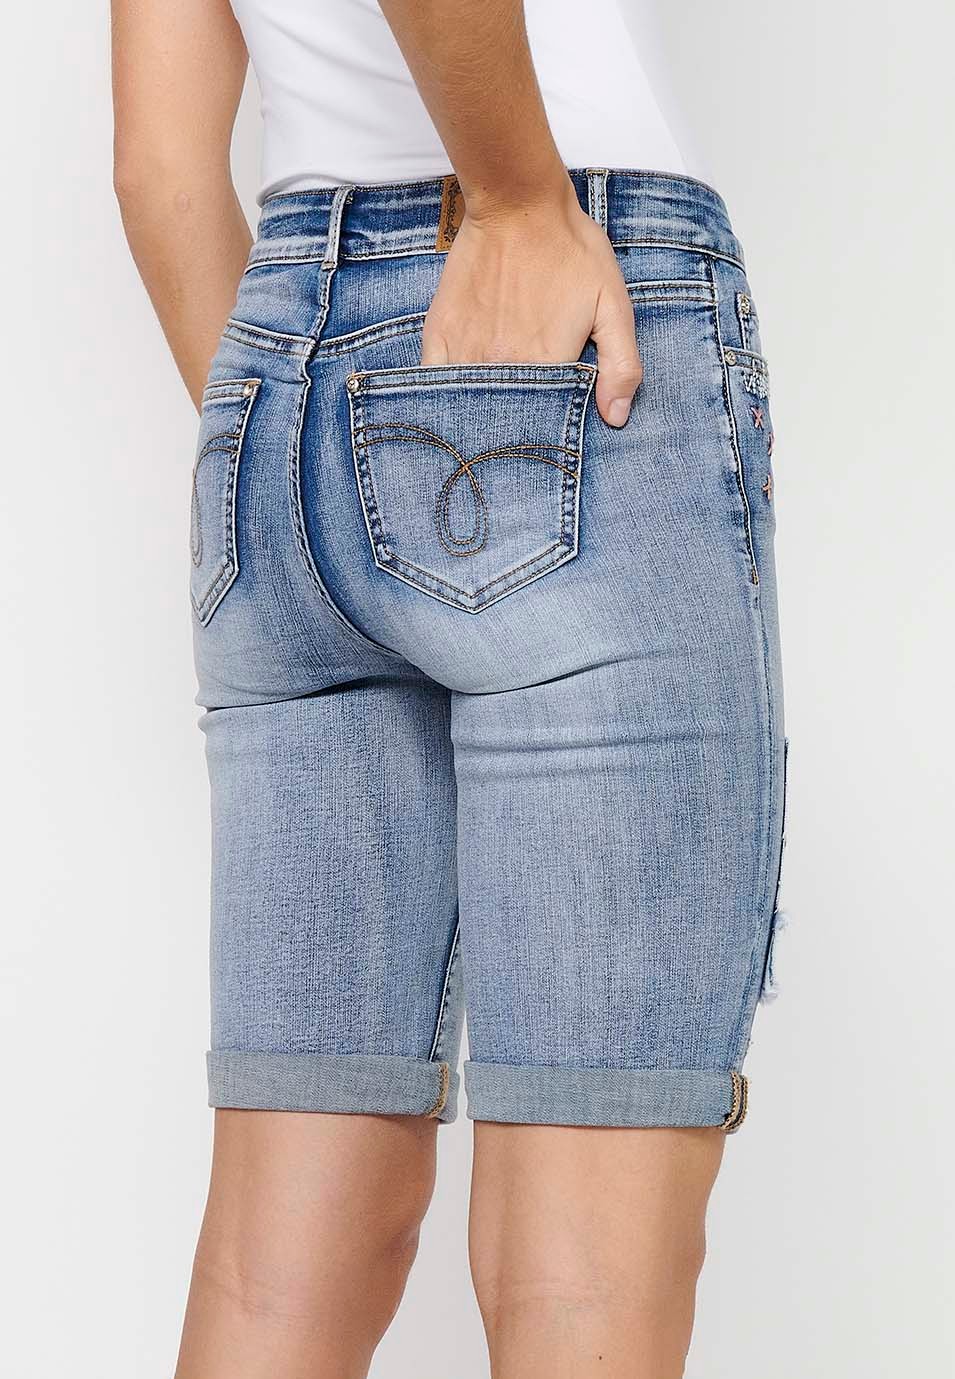 Short shorts finished in turn with details of front patches and removable chain decoration with front closure with zipper and button in Blue for Women 4